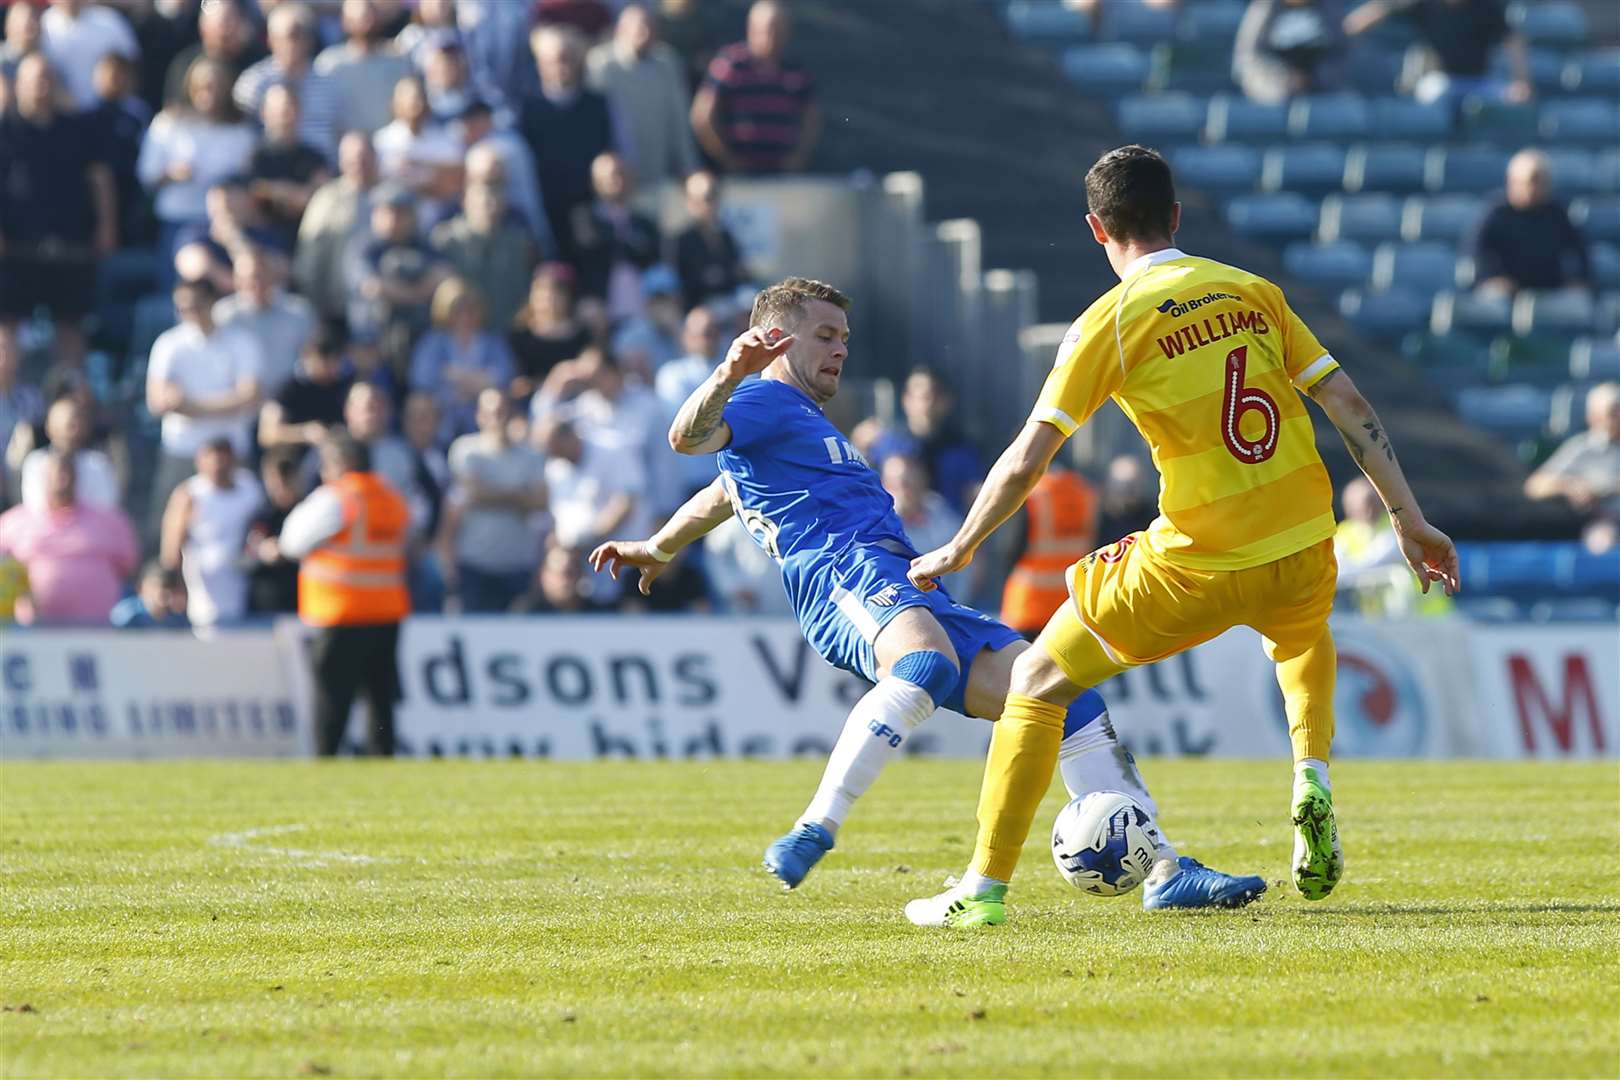 Mark Byrne fights for possession when the Gills played Millwall in the league at Priestfield in April, 2017 Picture: Andy Jones